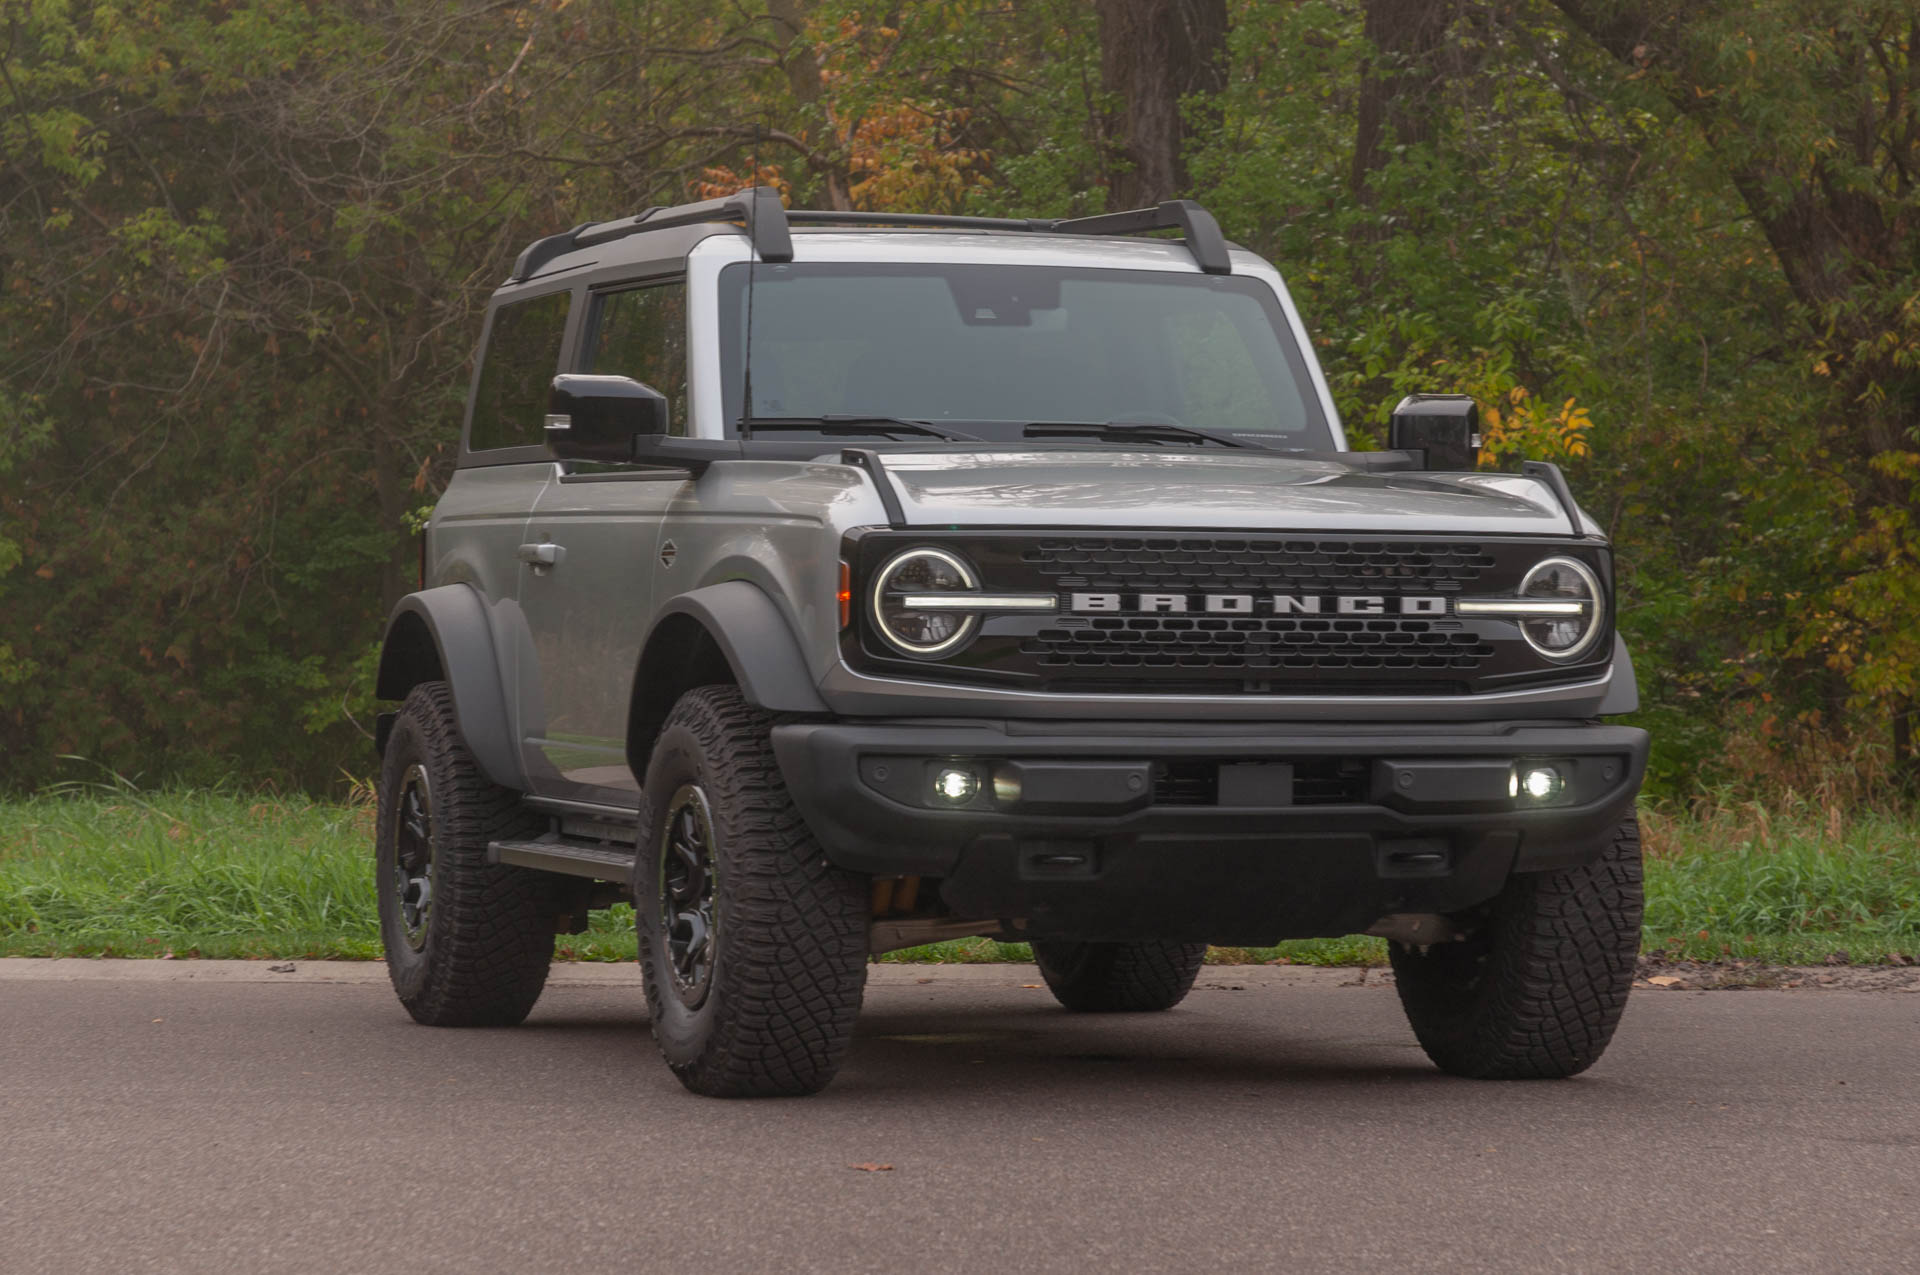 Review update: 2021 Ford Bronco Wildtrak delivers on Ford's promise